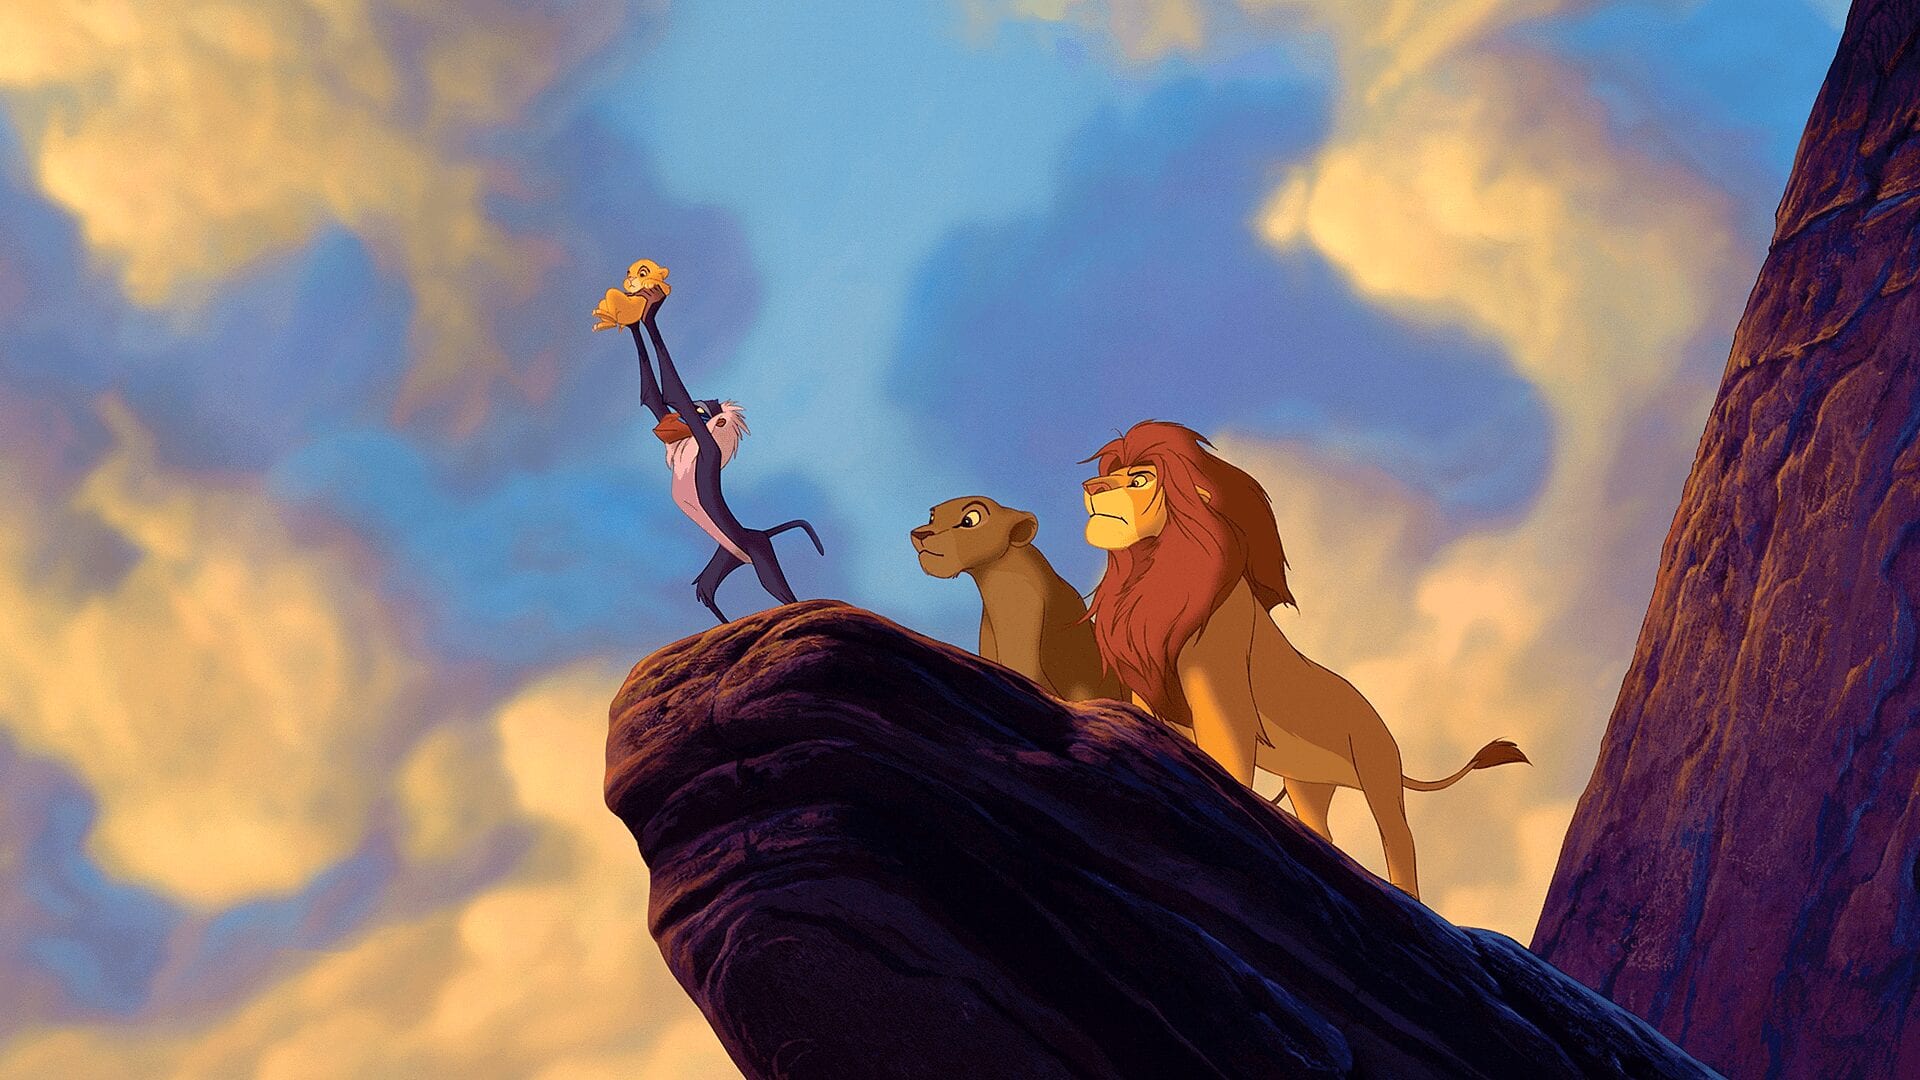 download the lion king 3